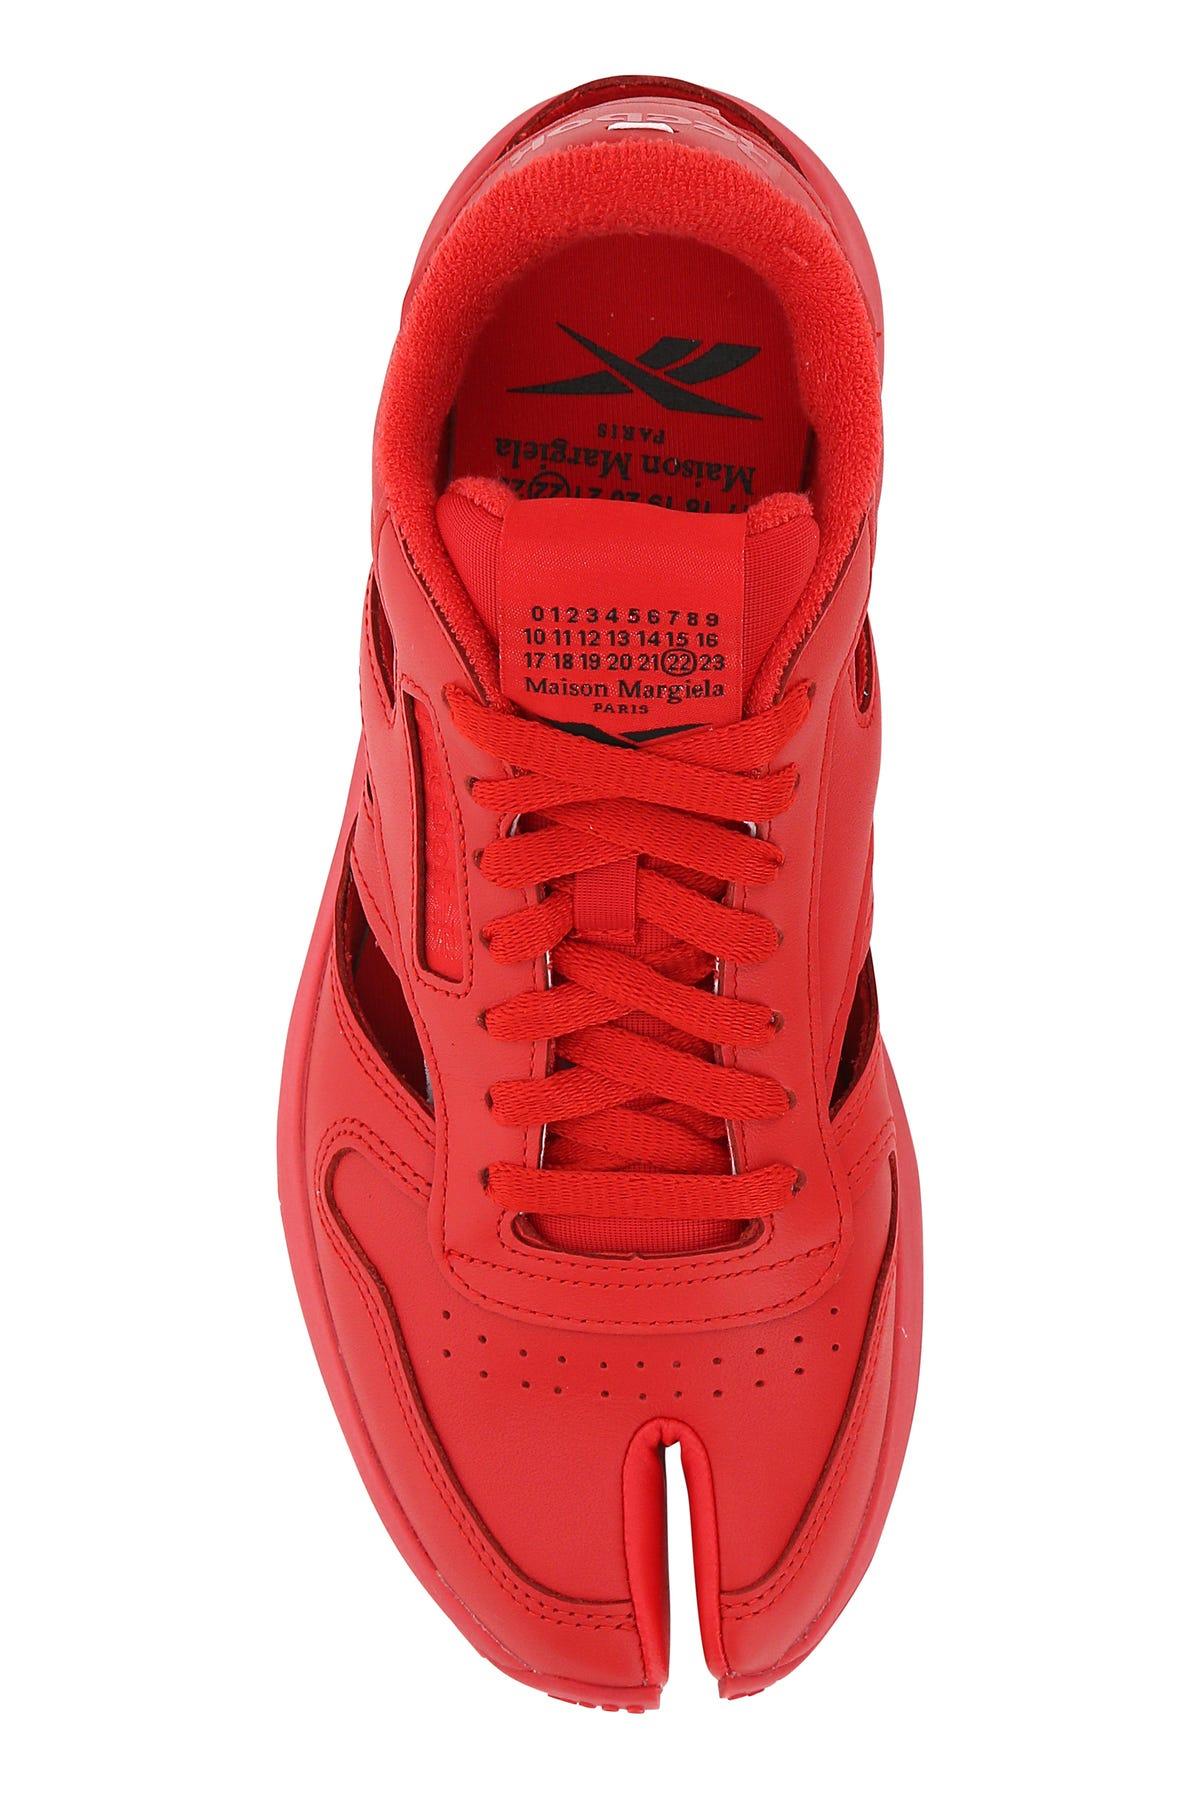 Maison Margiela Leather Tabi Classic 1985 Sneakers in Red for Men 